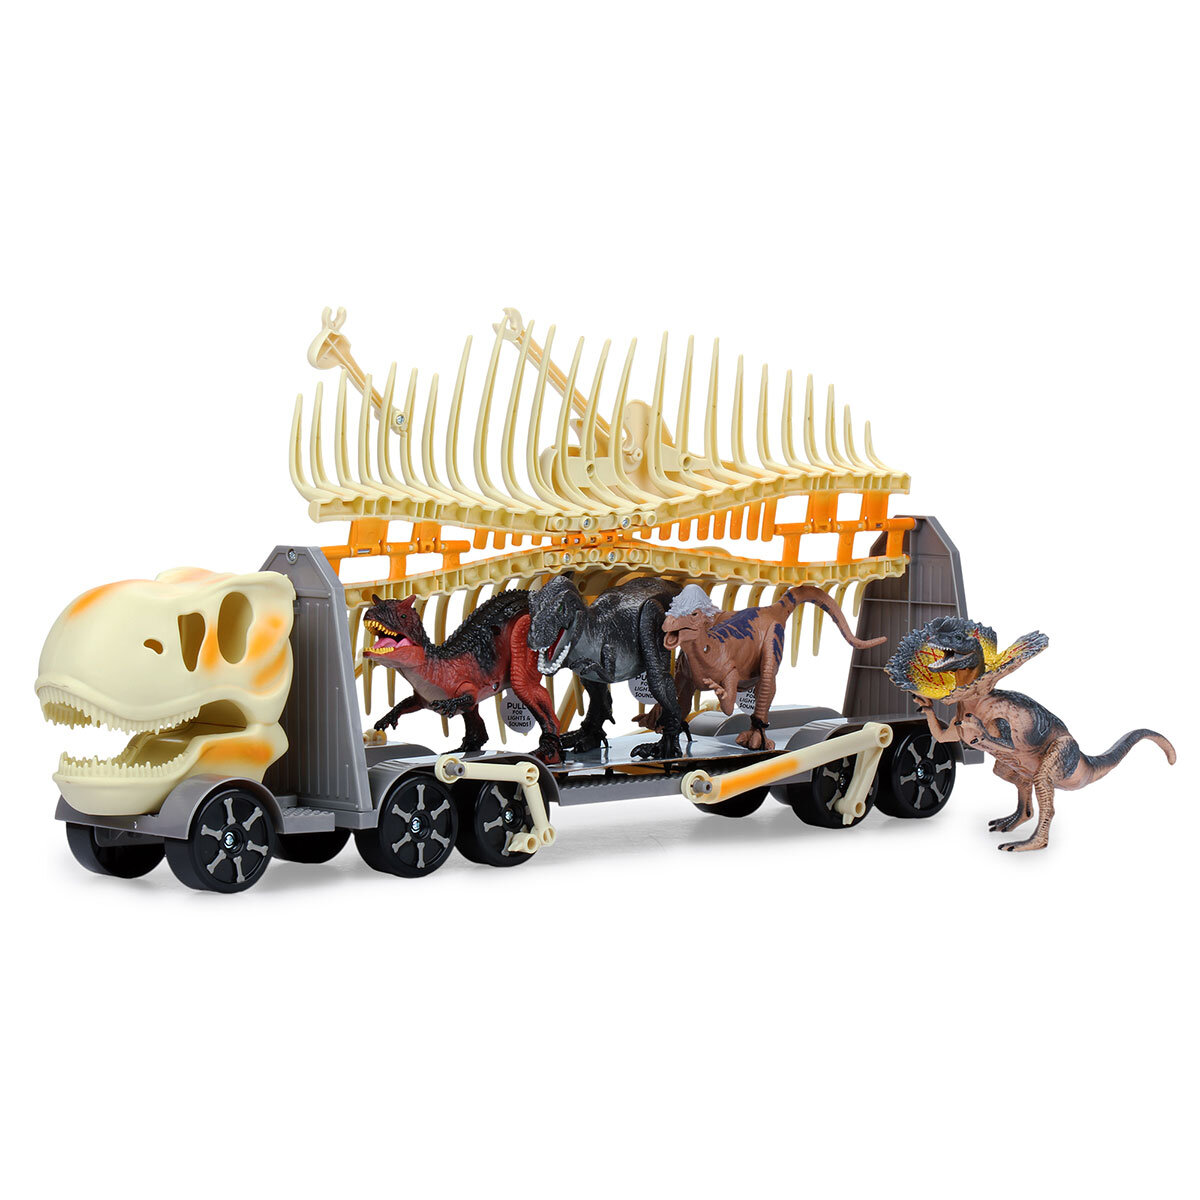 Buy Dino Hauler & 4 Dinos Overview Image at Costco.co.uk